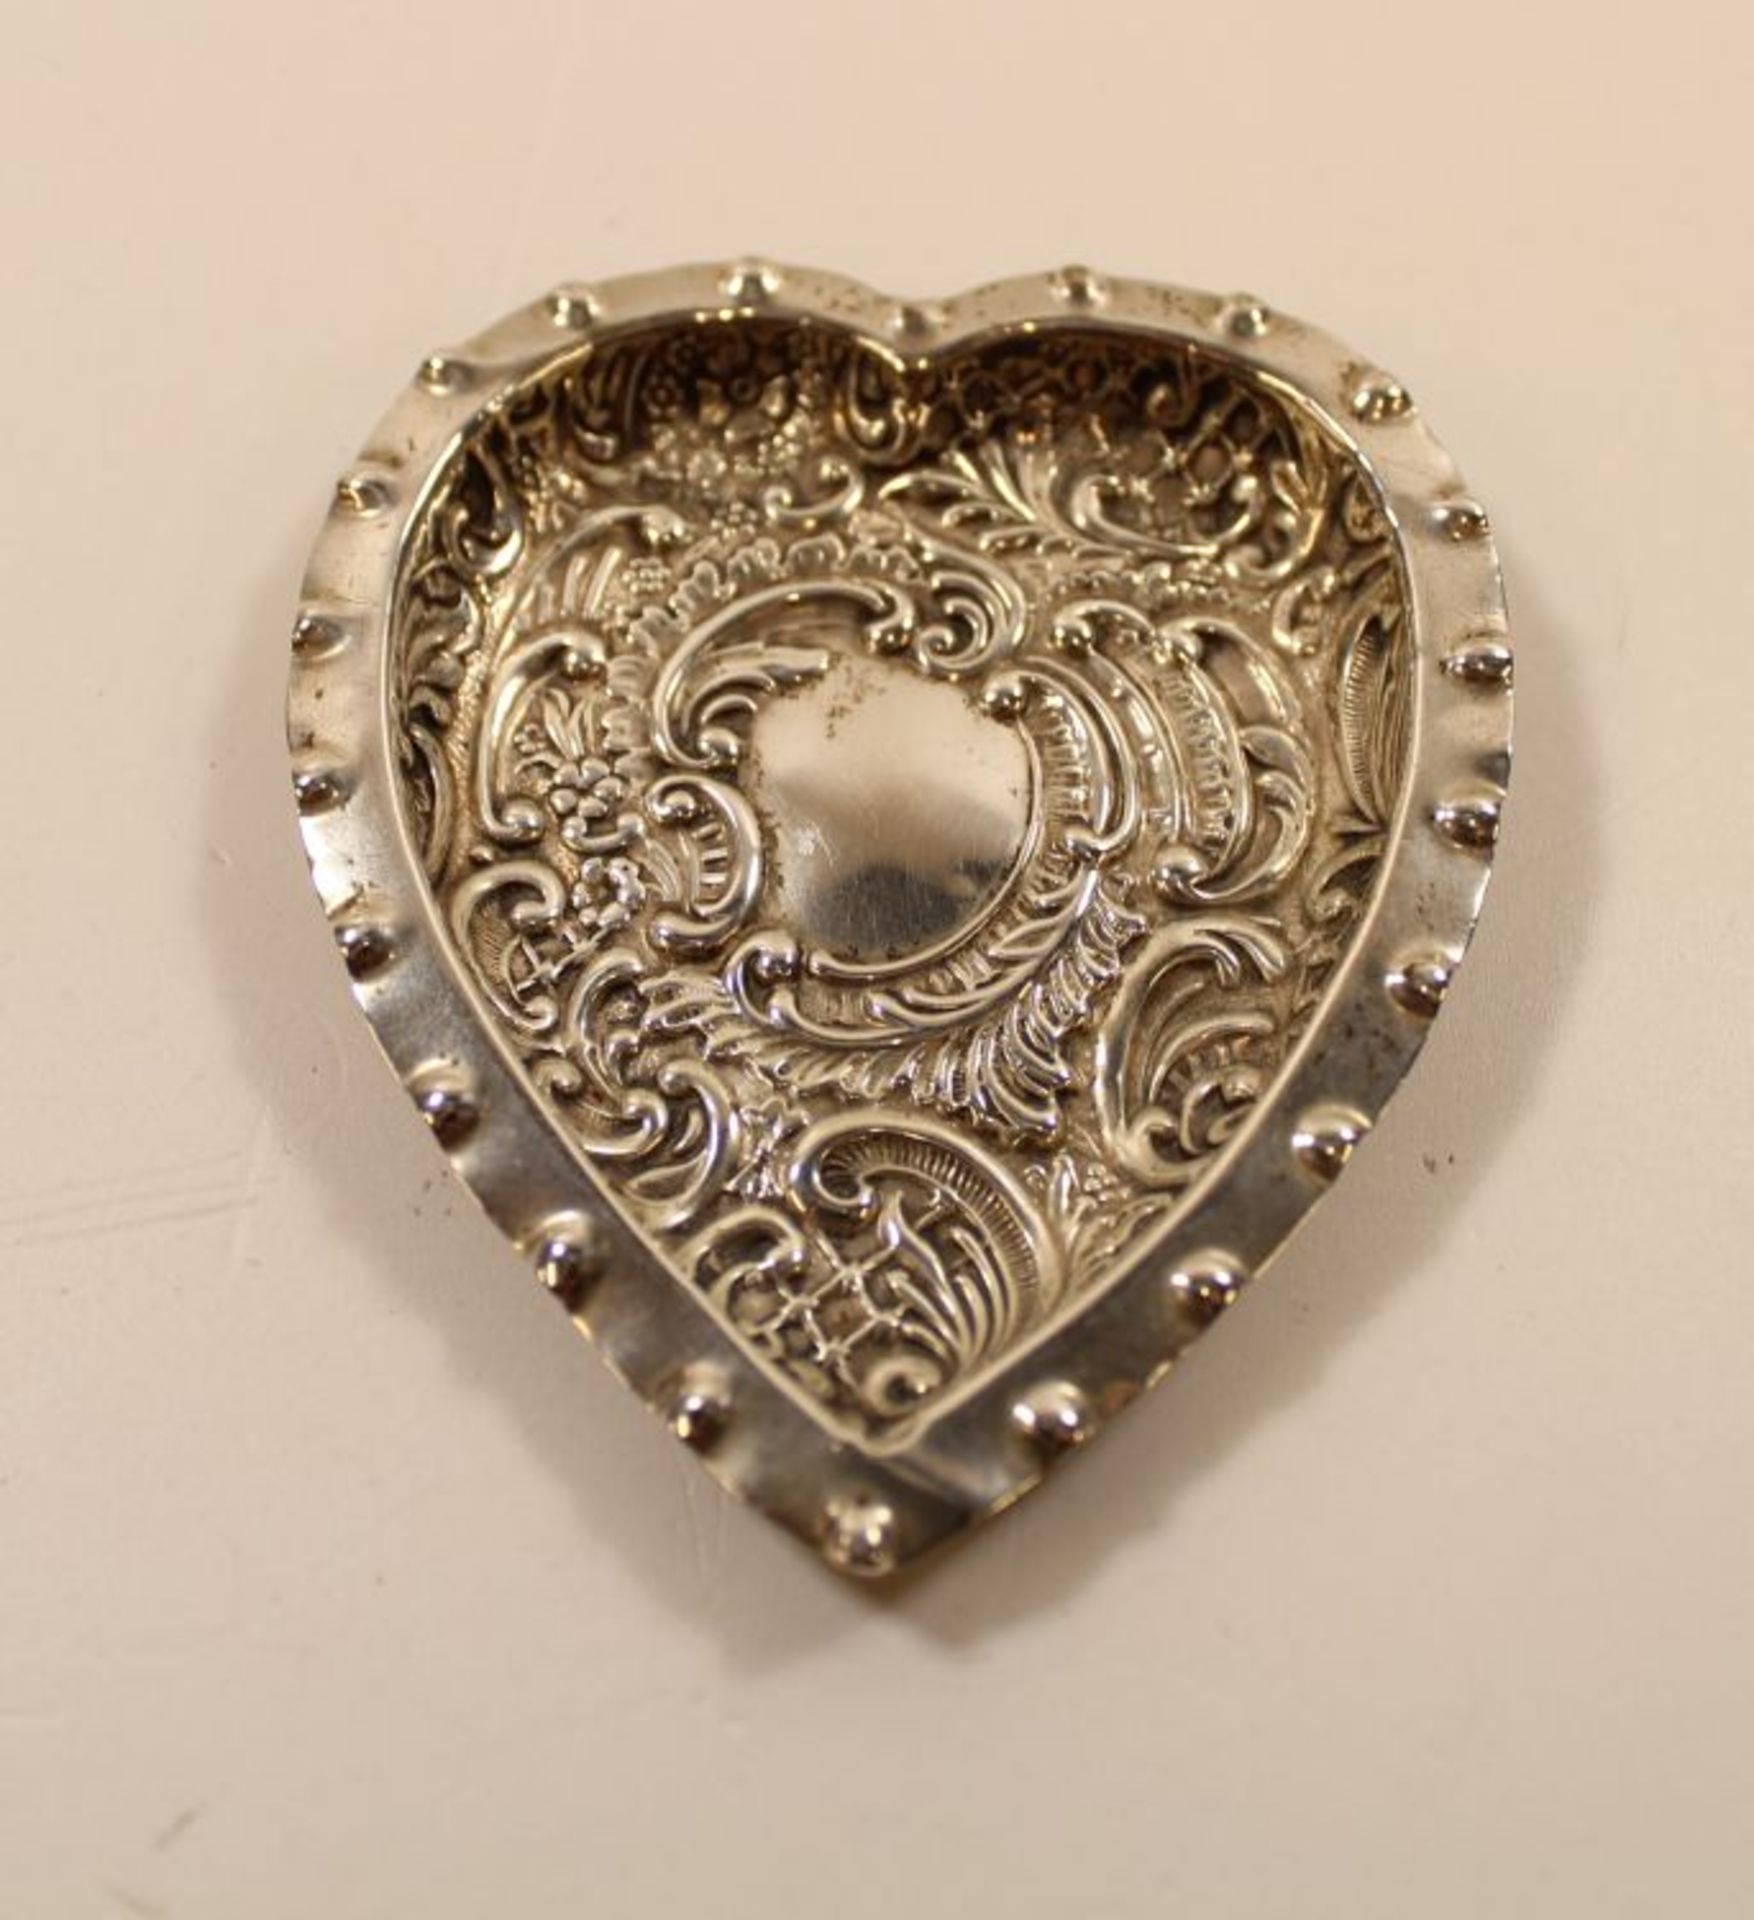 Antique Embossed Silver Heart shaped dish (chest 1896) (est £20-£40)